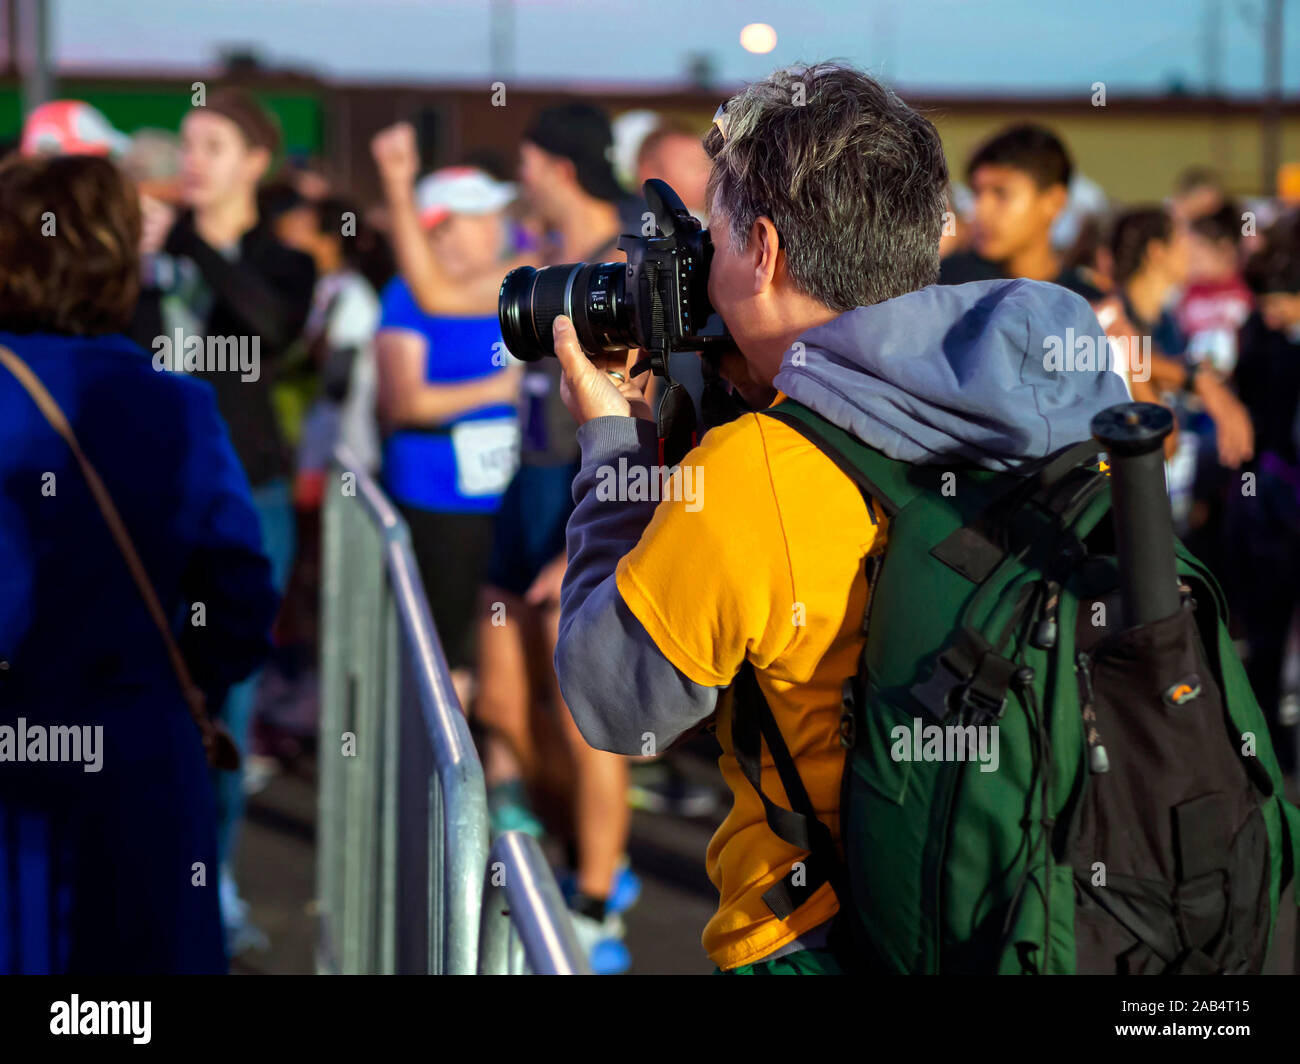 Female photographer focuses her camera on the crowd of competitors awaiting the start of the Corpus Christi 15th annual Harbor Half Marathon. Stock Photo